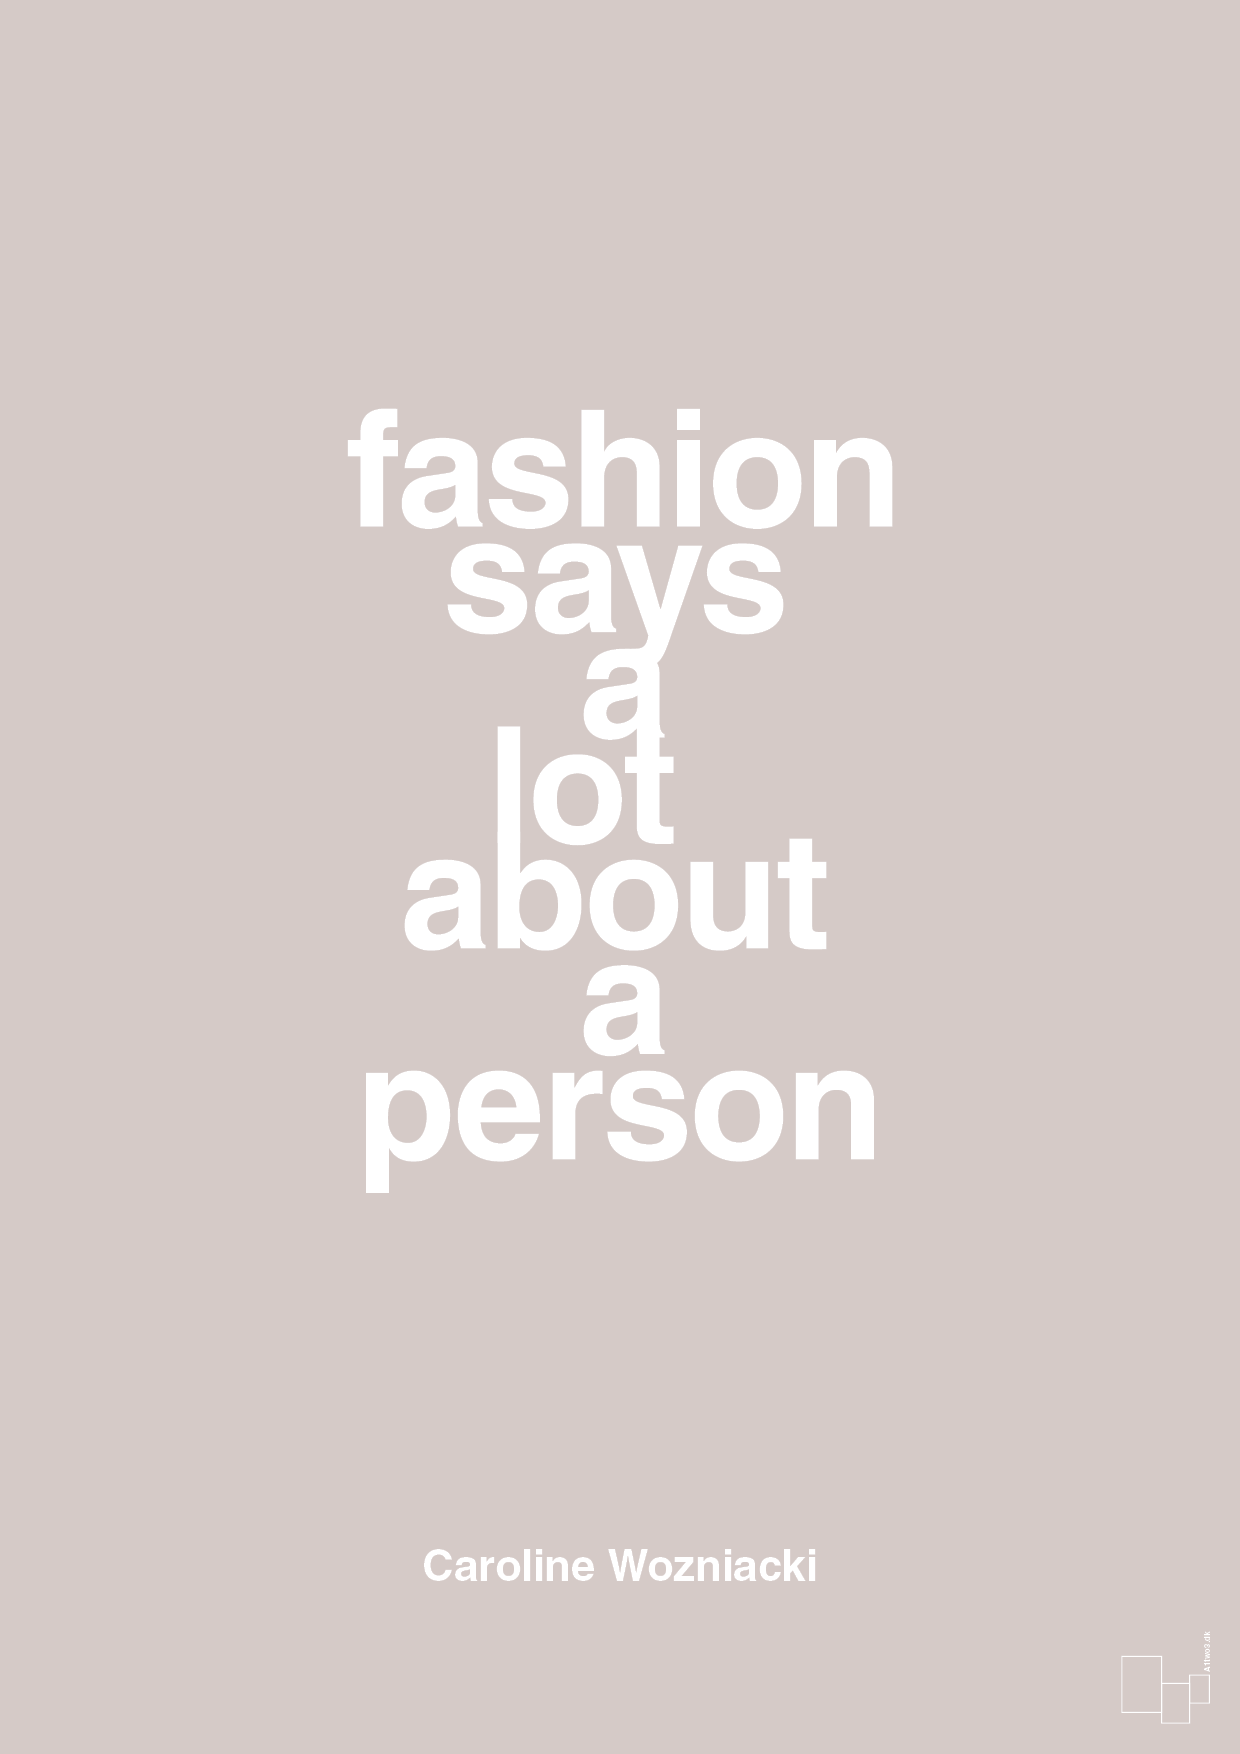 fashion says a lot about a person - Plakat med Citater i Broken Beige